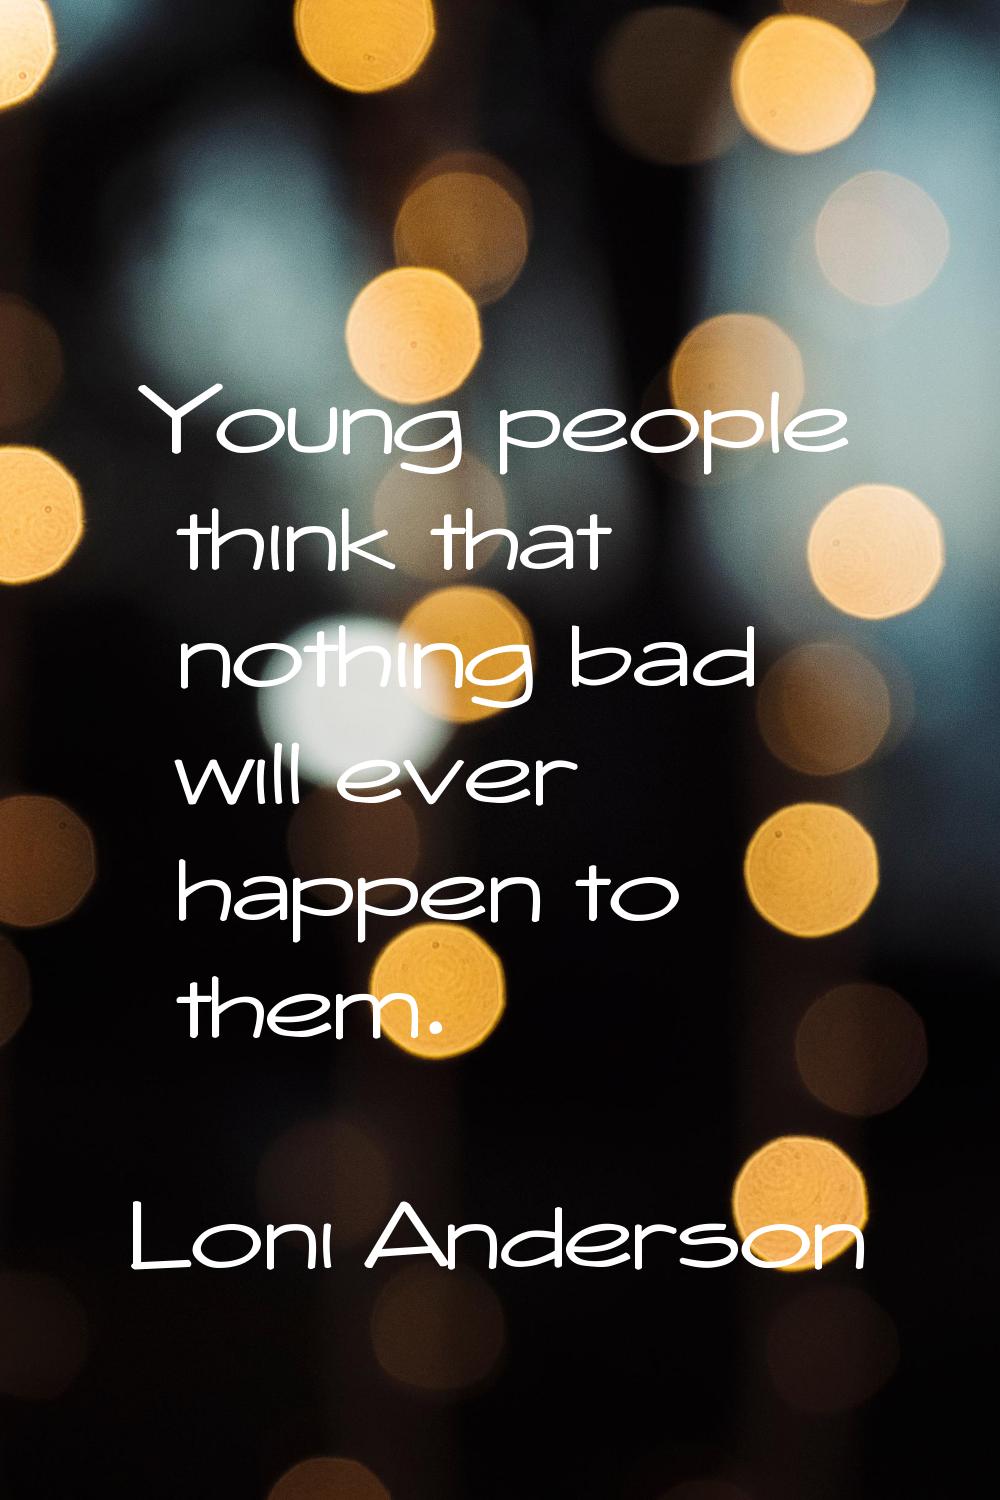 Young people think that nothing bad will ever happen to them.